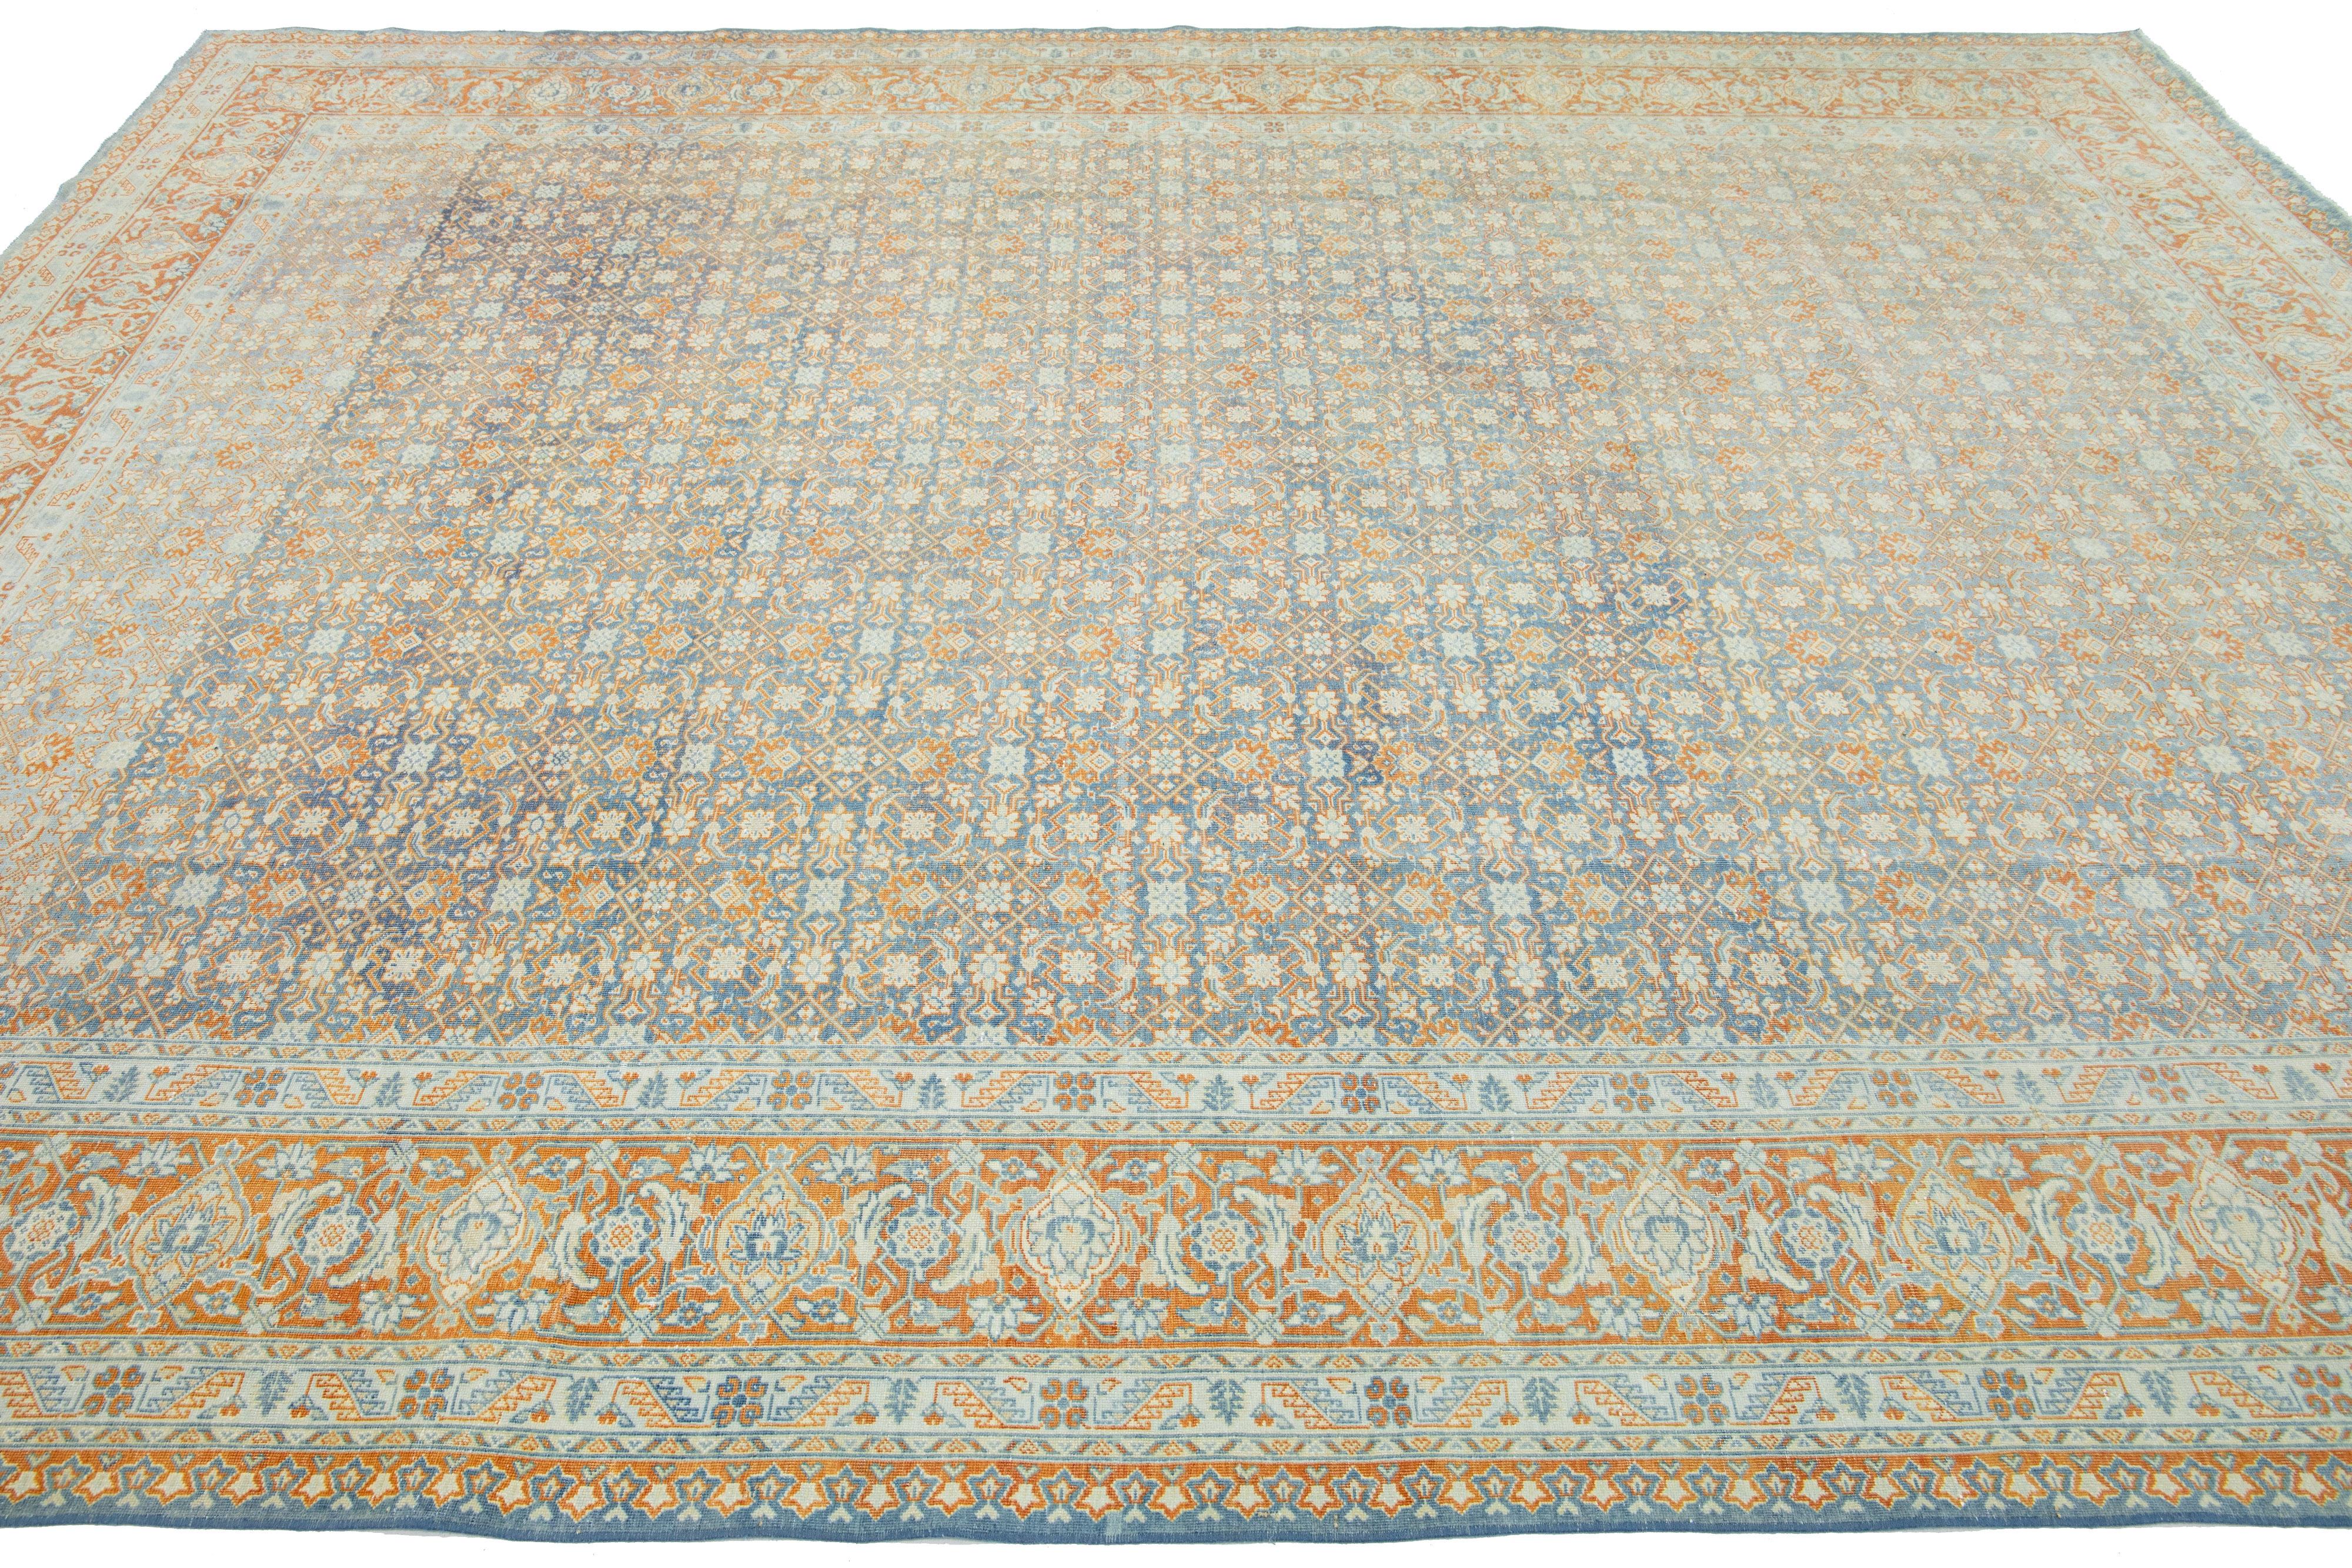 20th Century Antique Persian Malayer Allover Wool Rug Handmade In Blue & Orange  For Sale 1